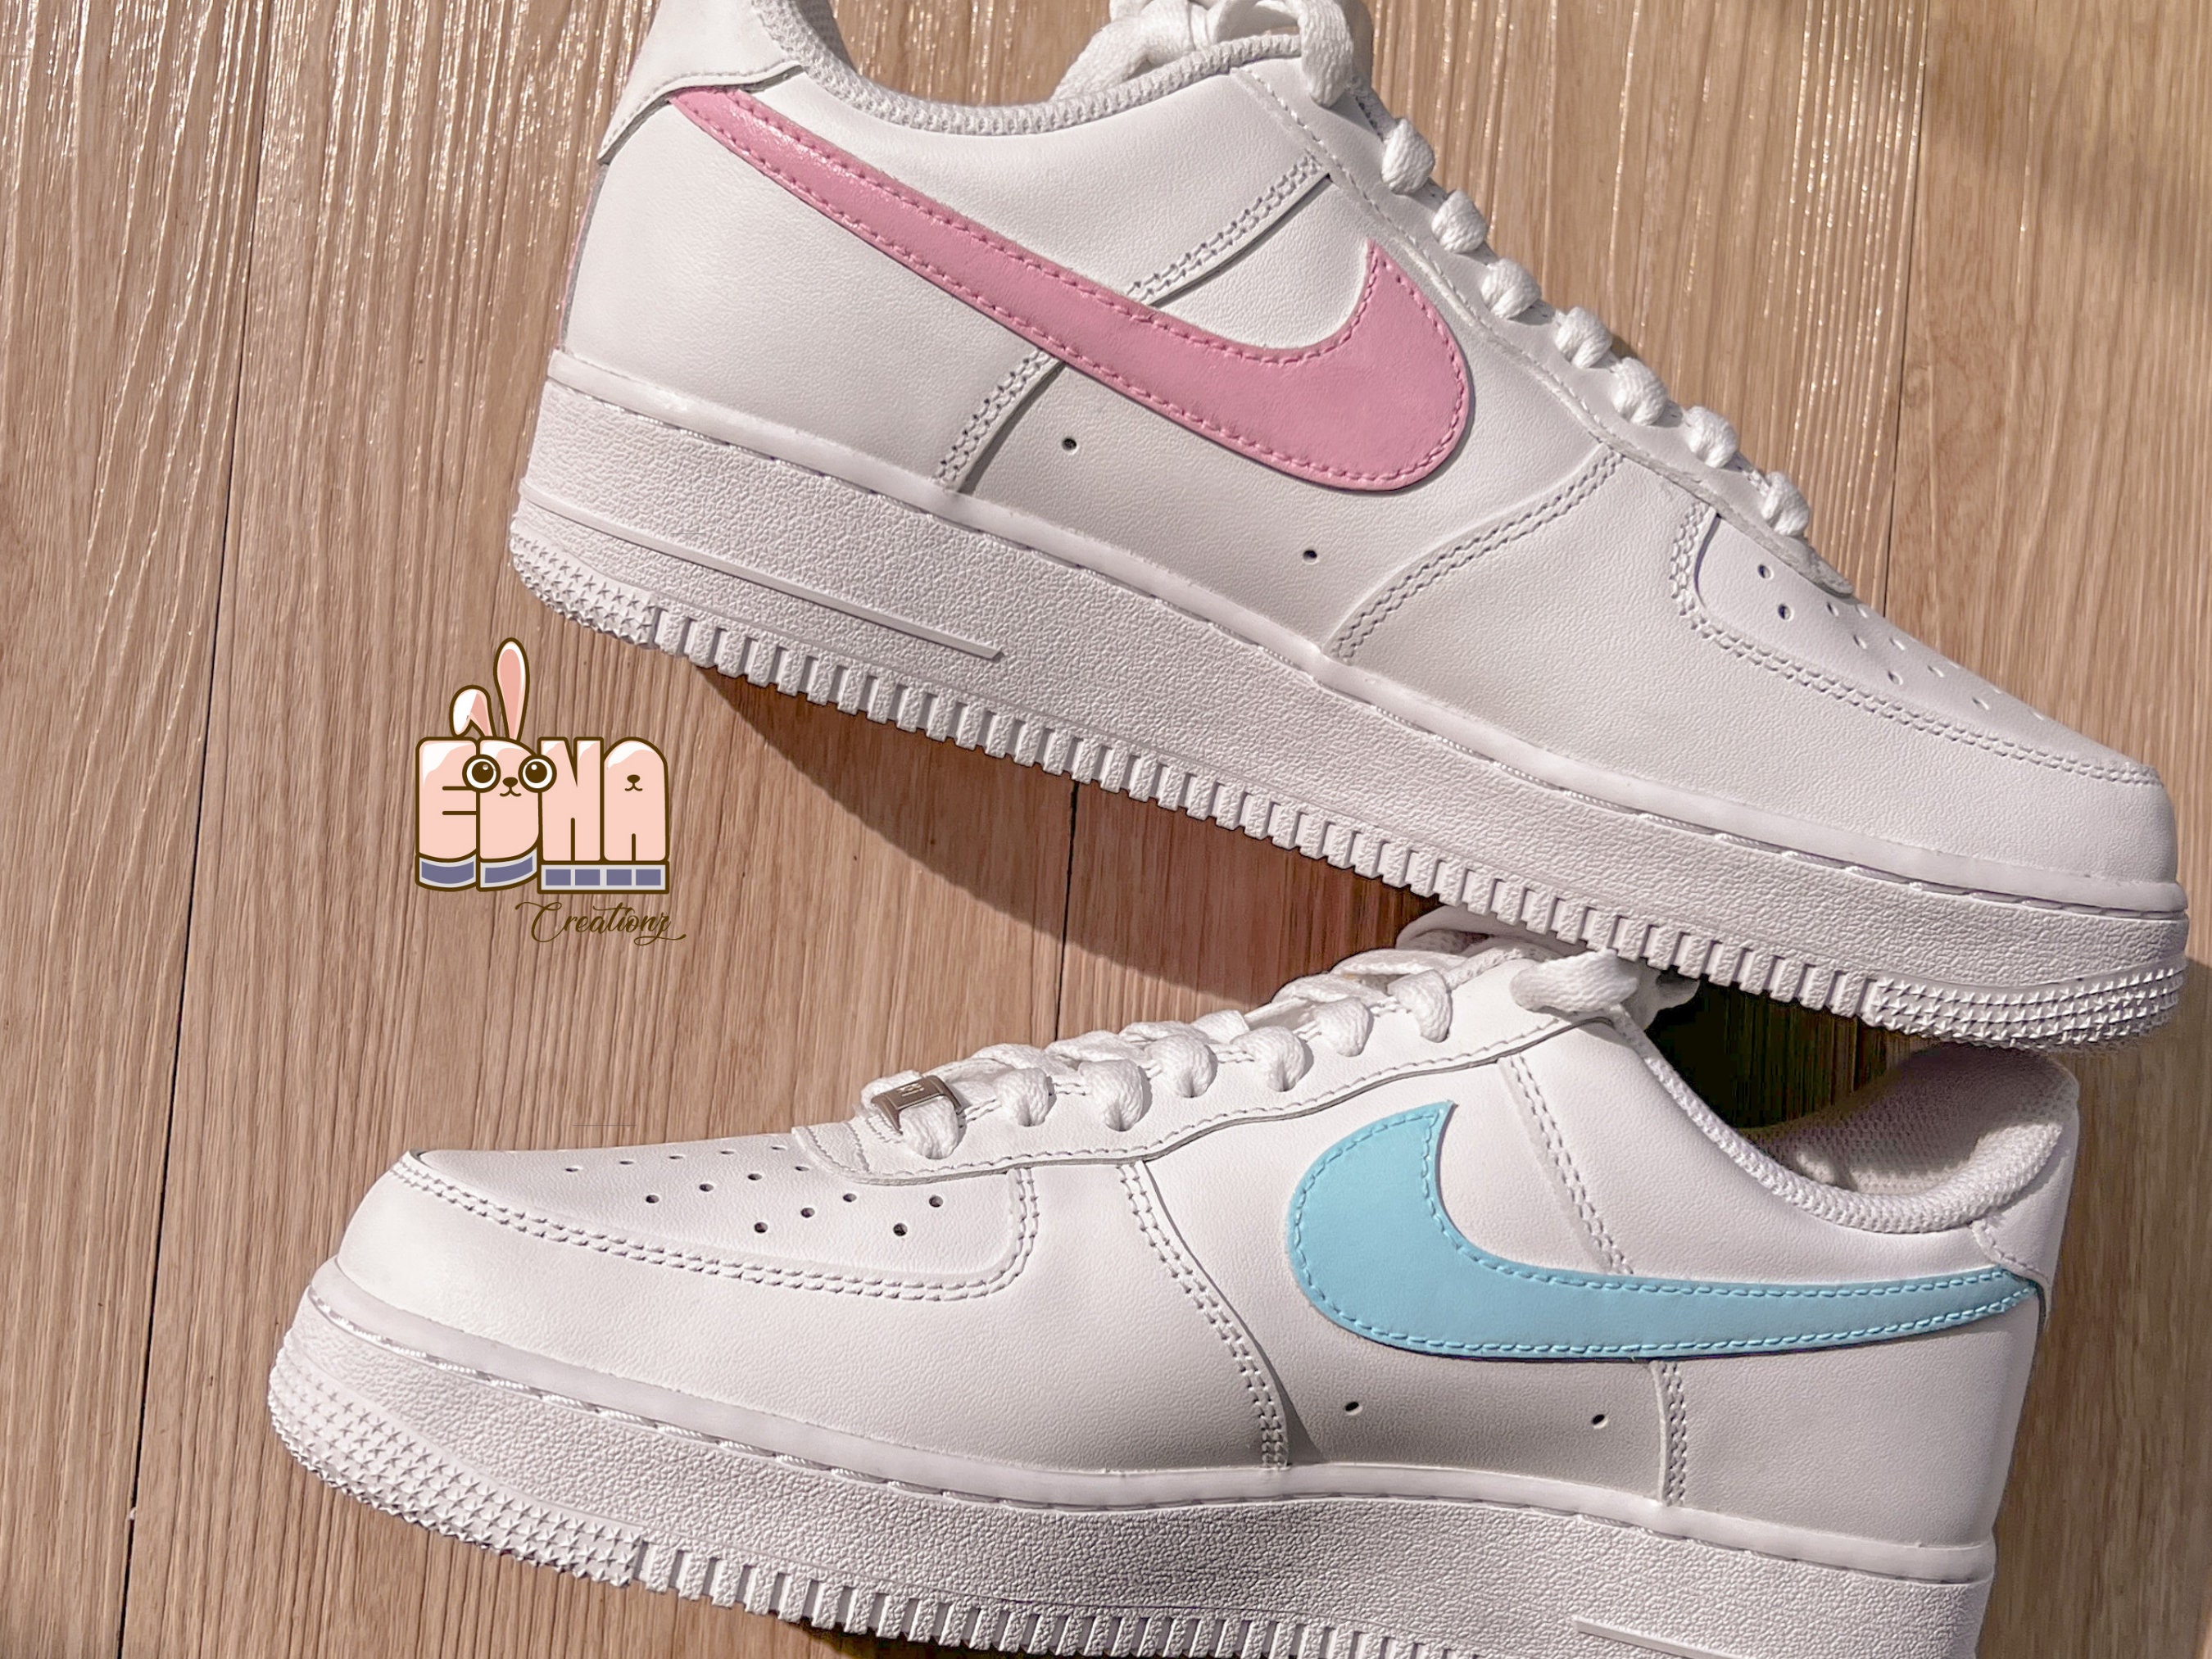 sensor lobby graven Nike Air Force 1 Stitch for Women Disney Hand-painted - Etsy Israel